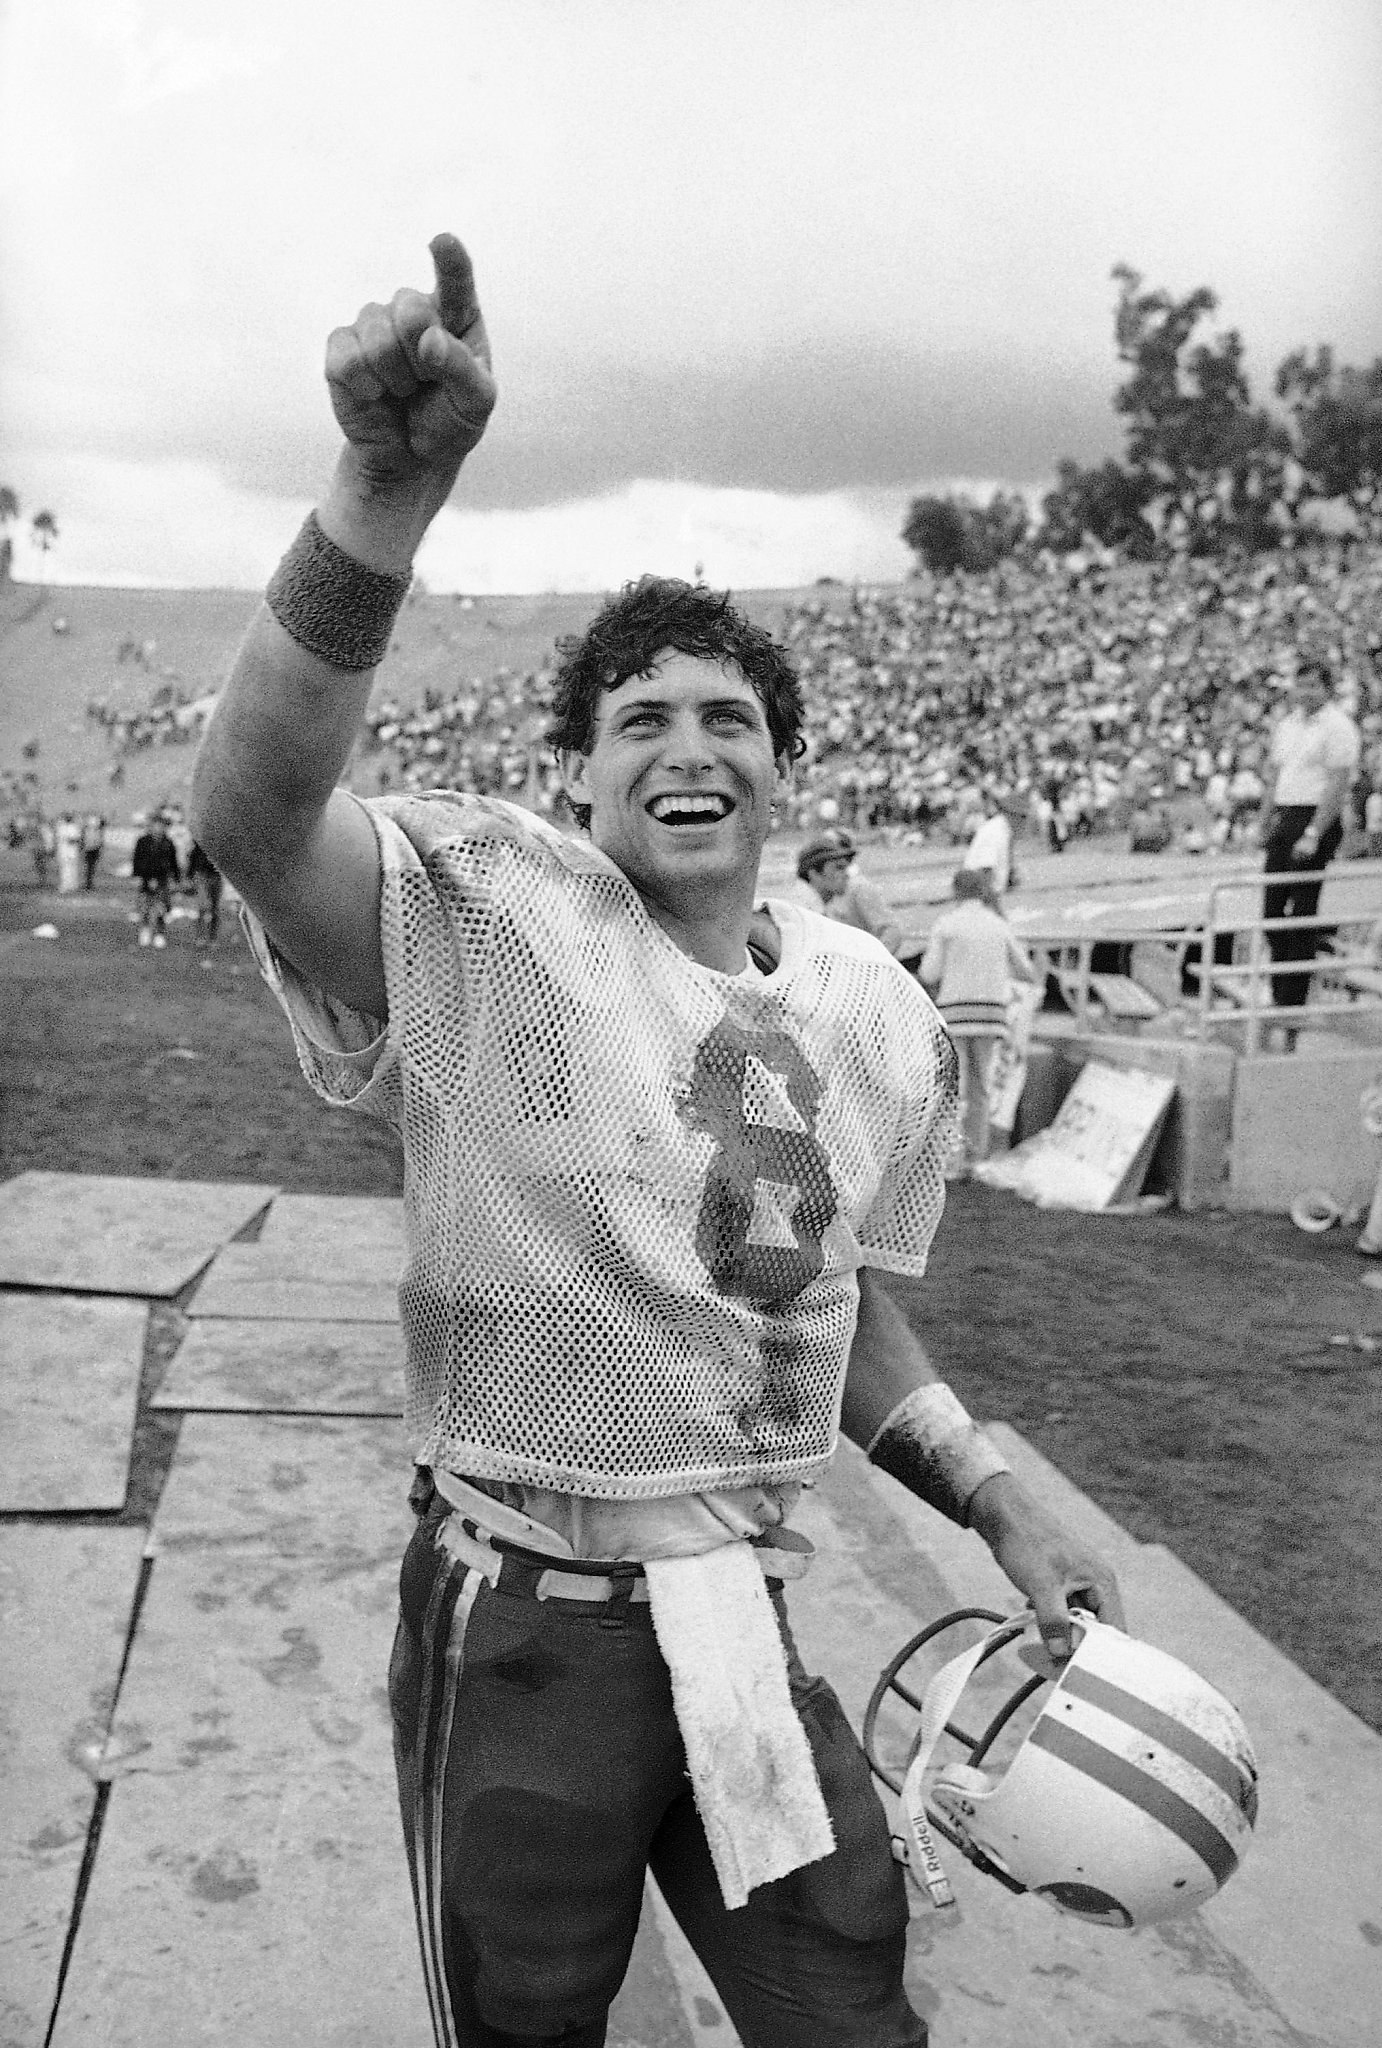 A look back at Steve Young